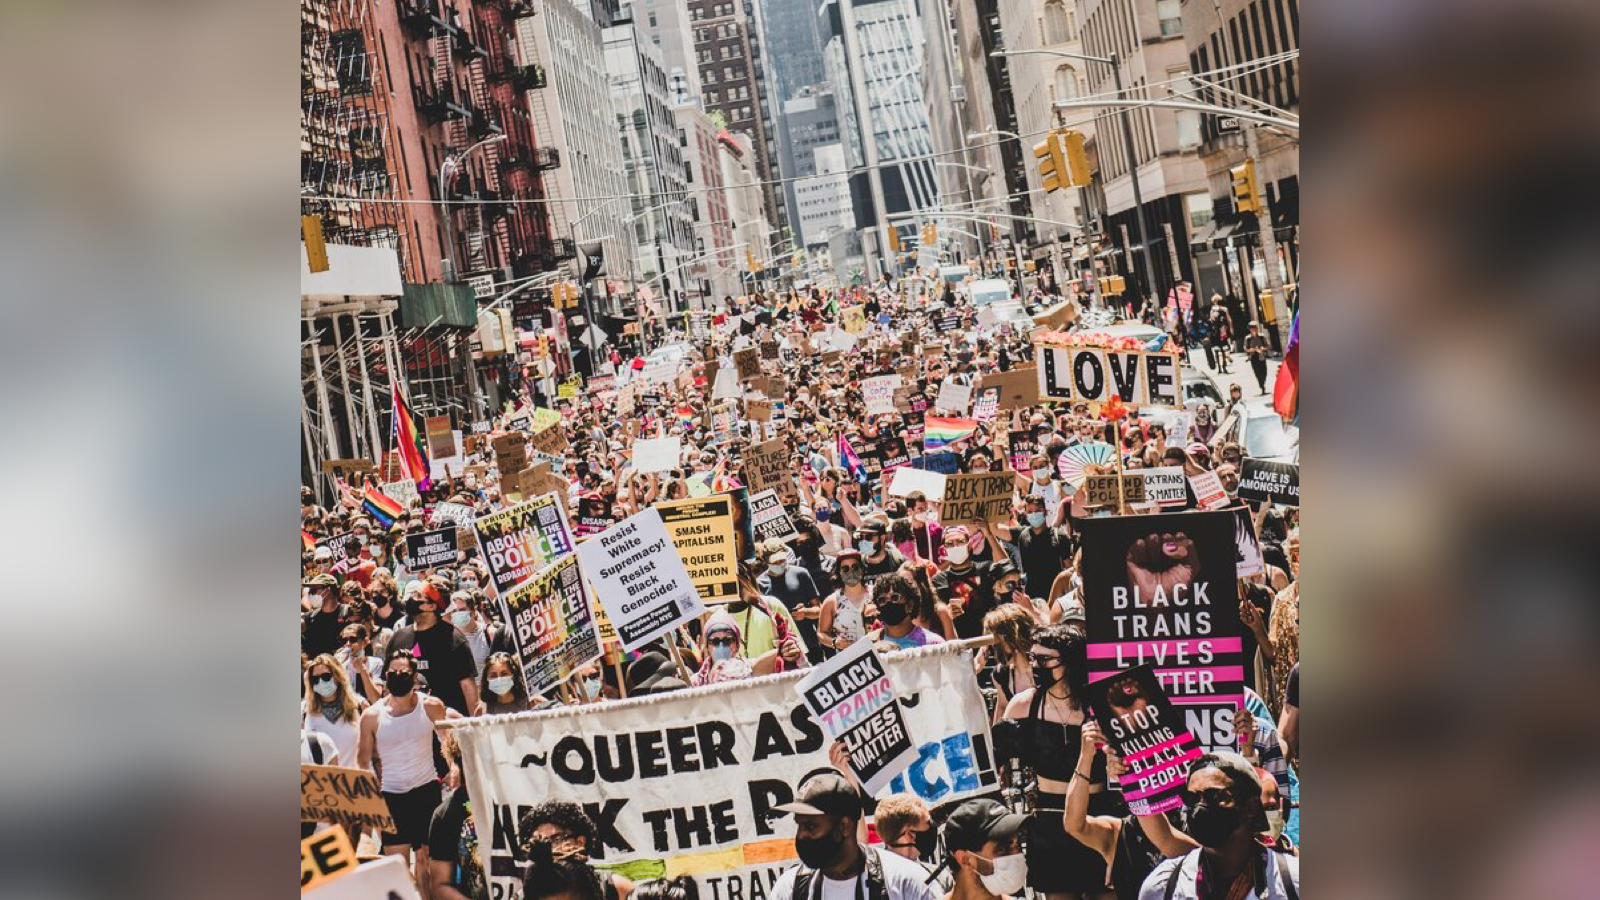 When it comes to NYC&#8217;s dueling Pride parades&#8230; &#8220;The Fight Continues&#8221;